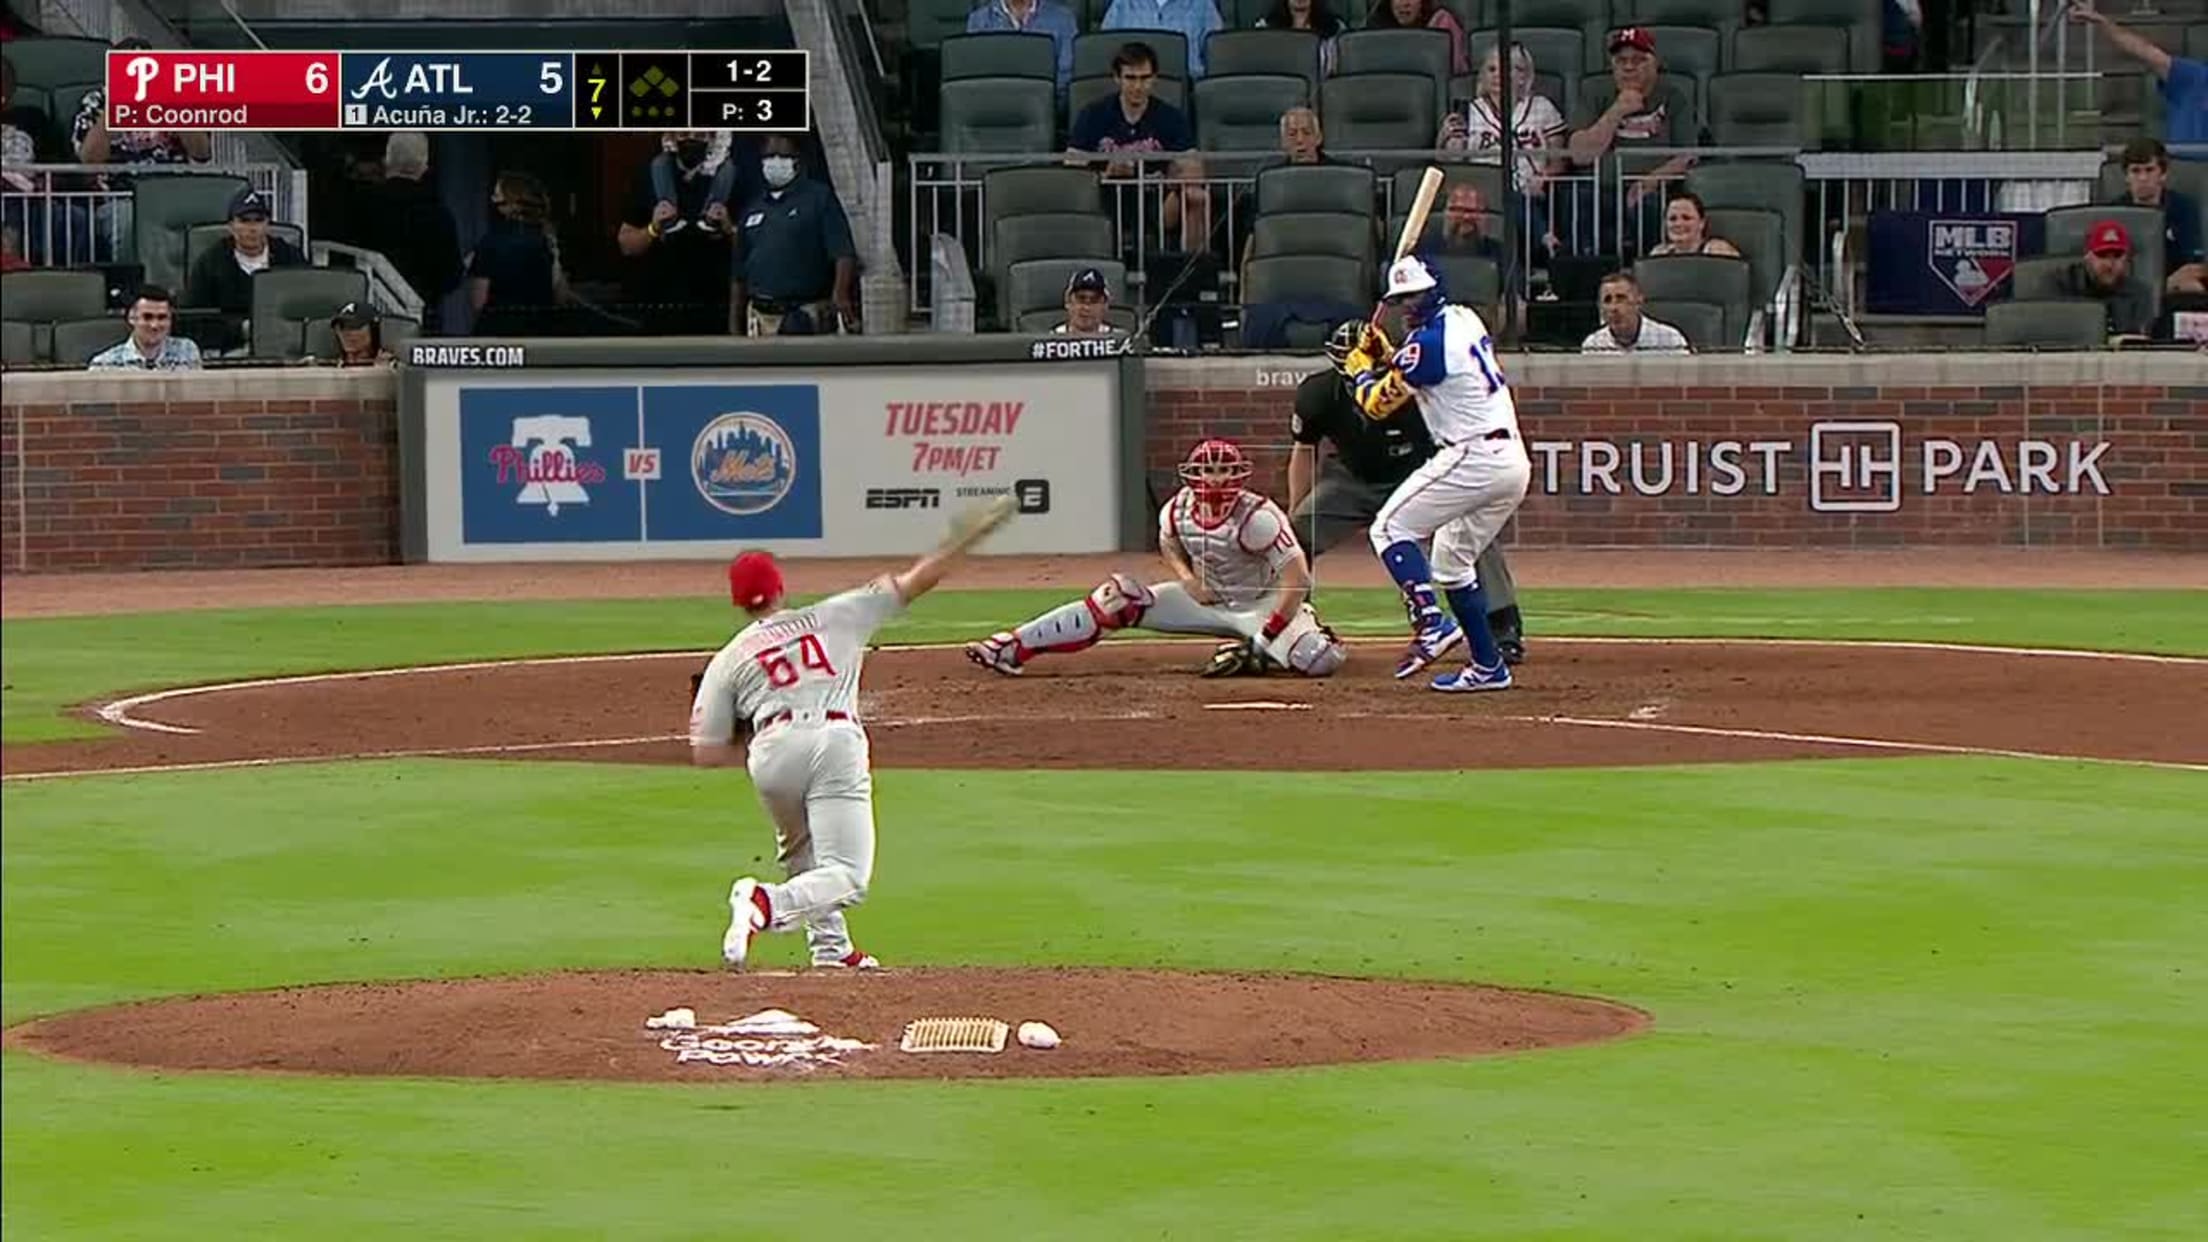 Ronald Acuña Jr. just beat out a routine ground ball to short. : r/baseball